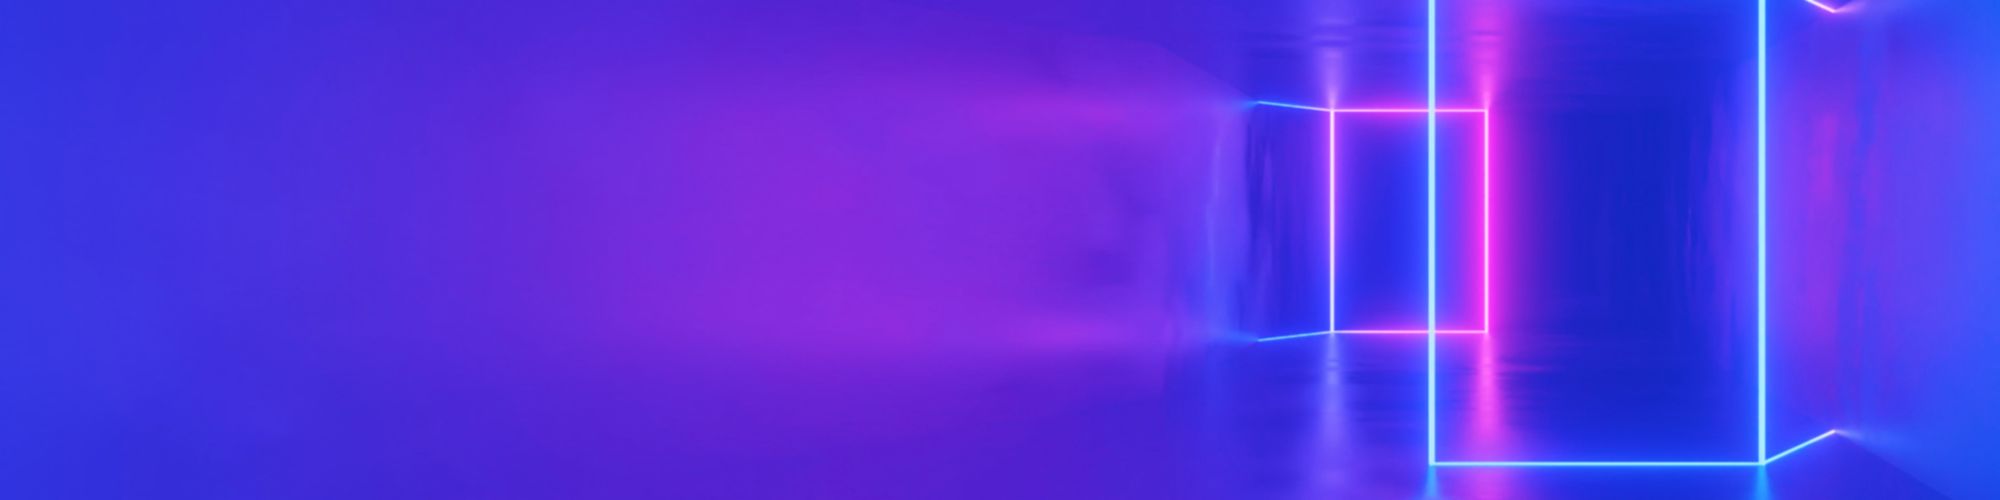 blue purple abstract